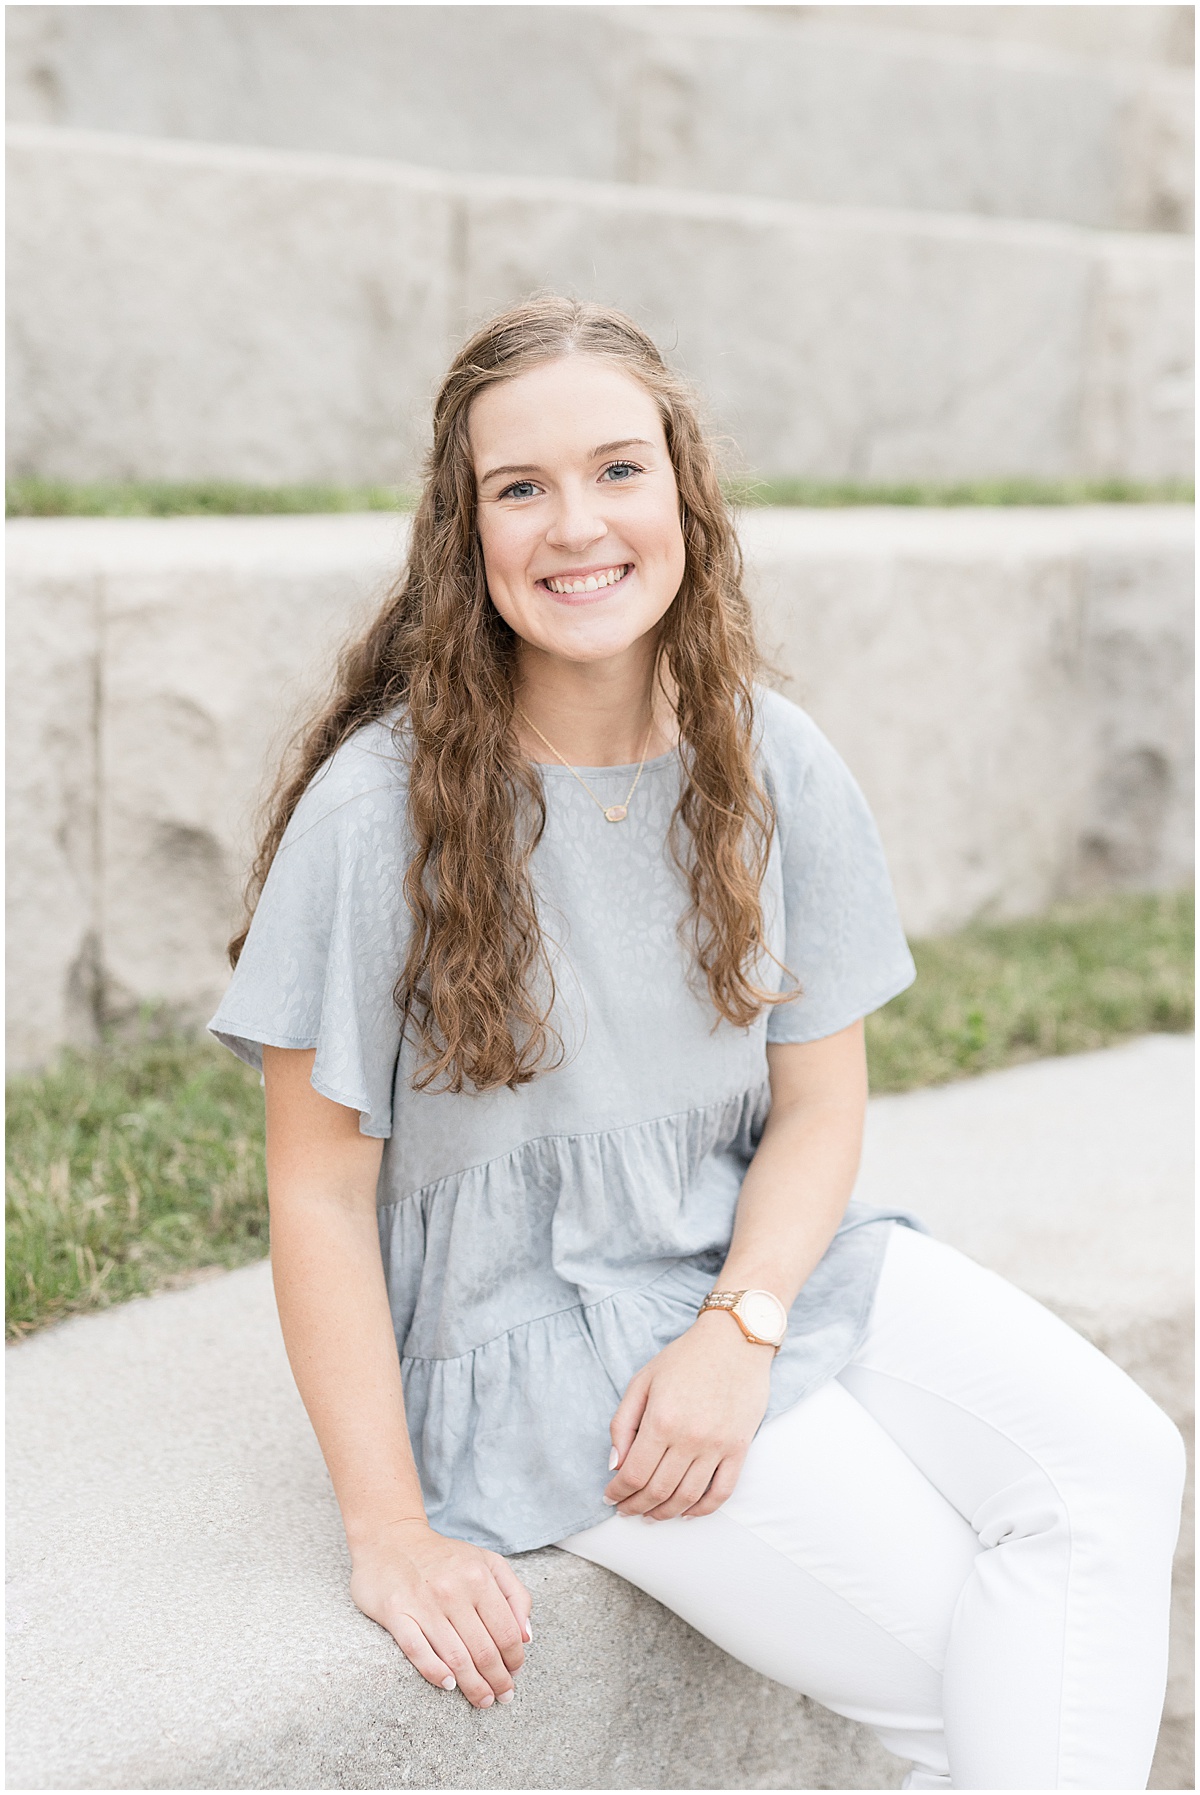 Shelby Schambach—a senior photographer herself—decided to take her senior photos at Newfields in Indianapolis